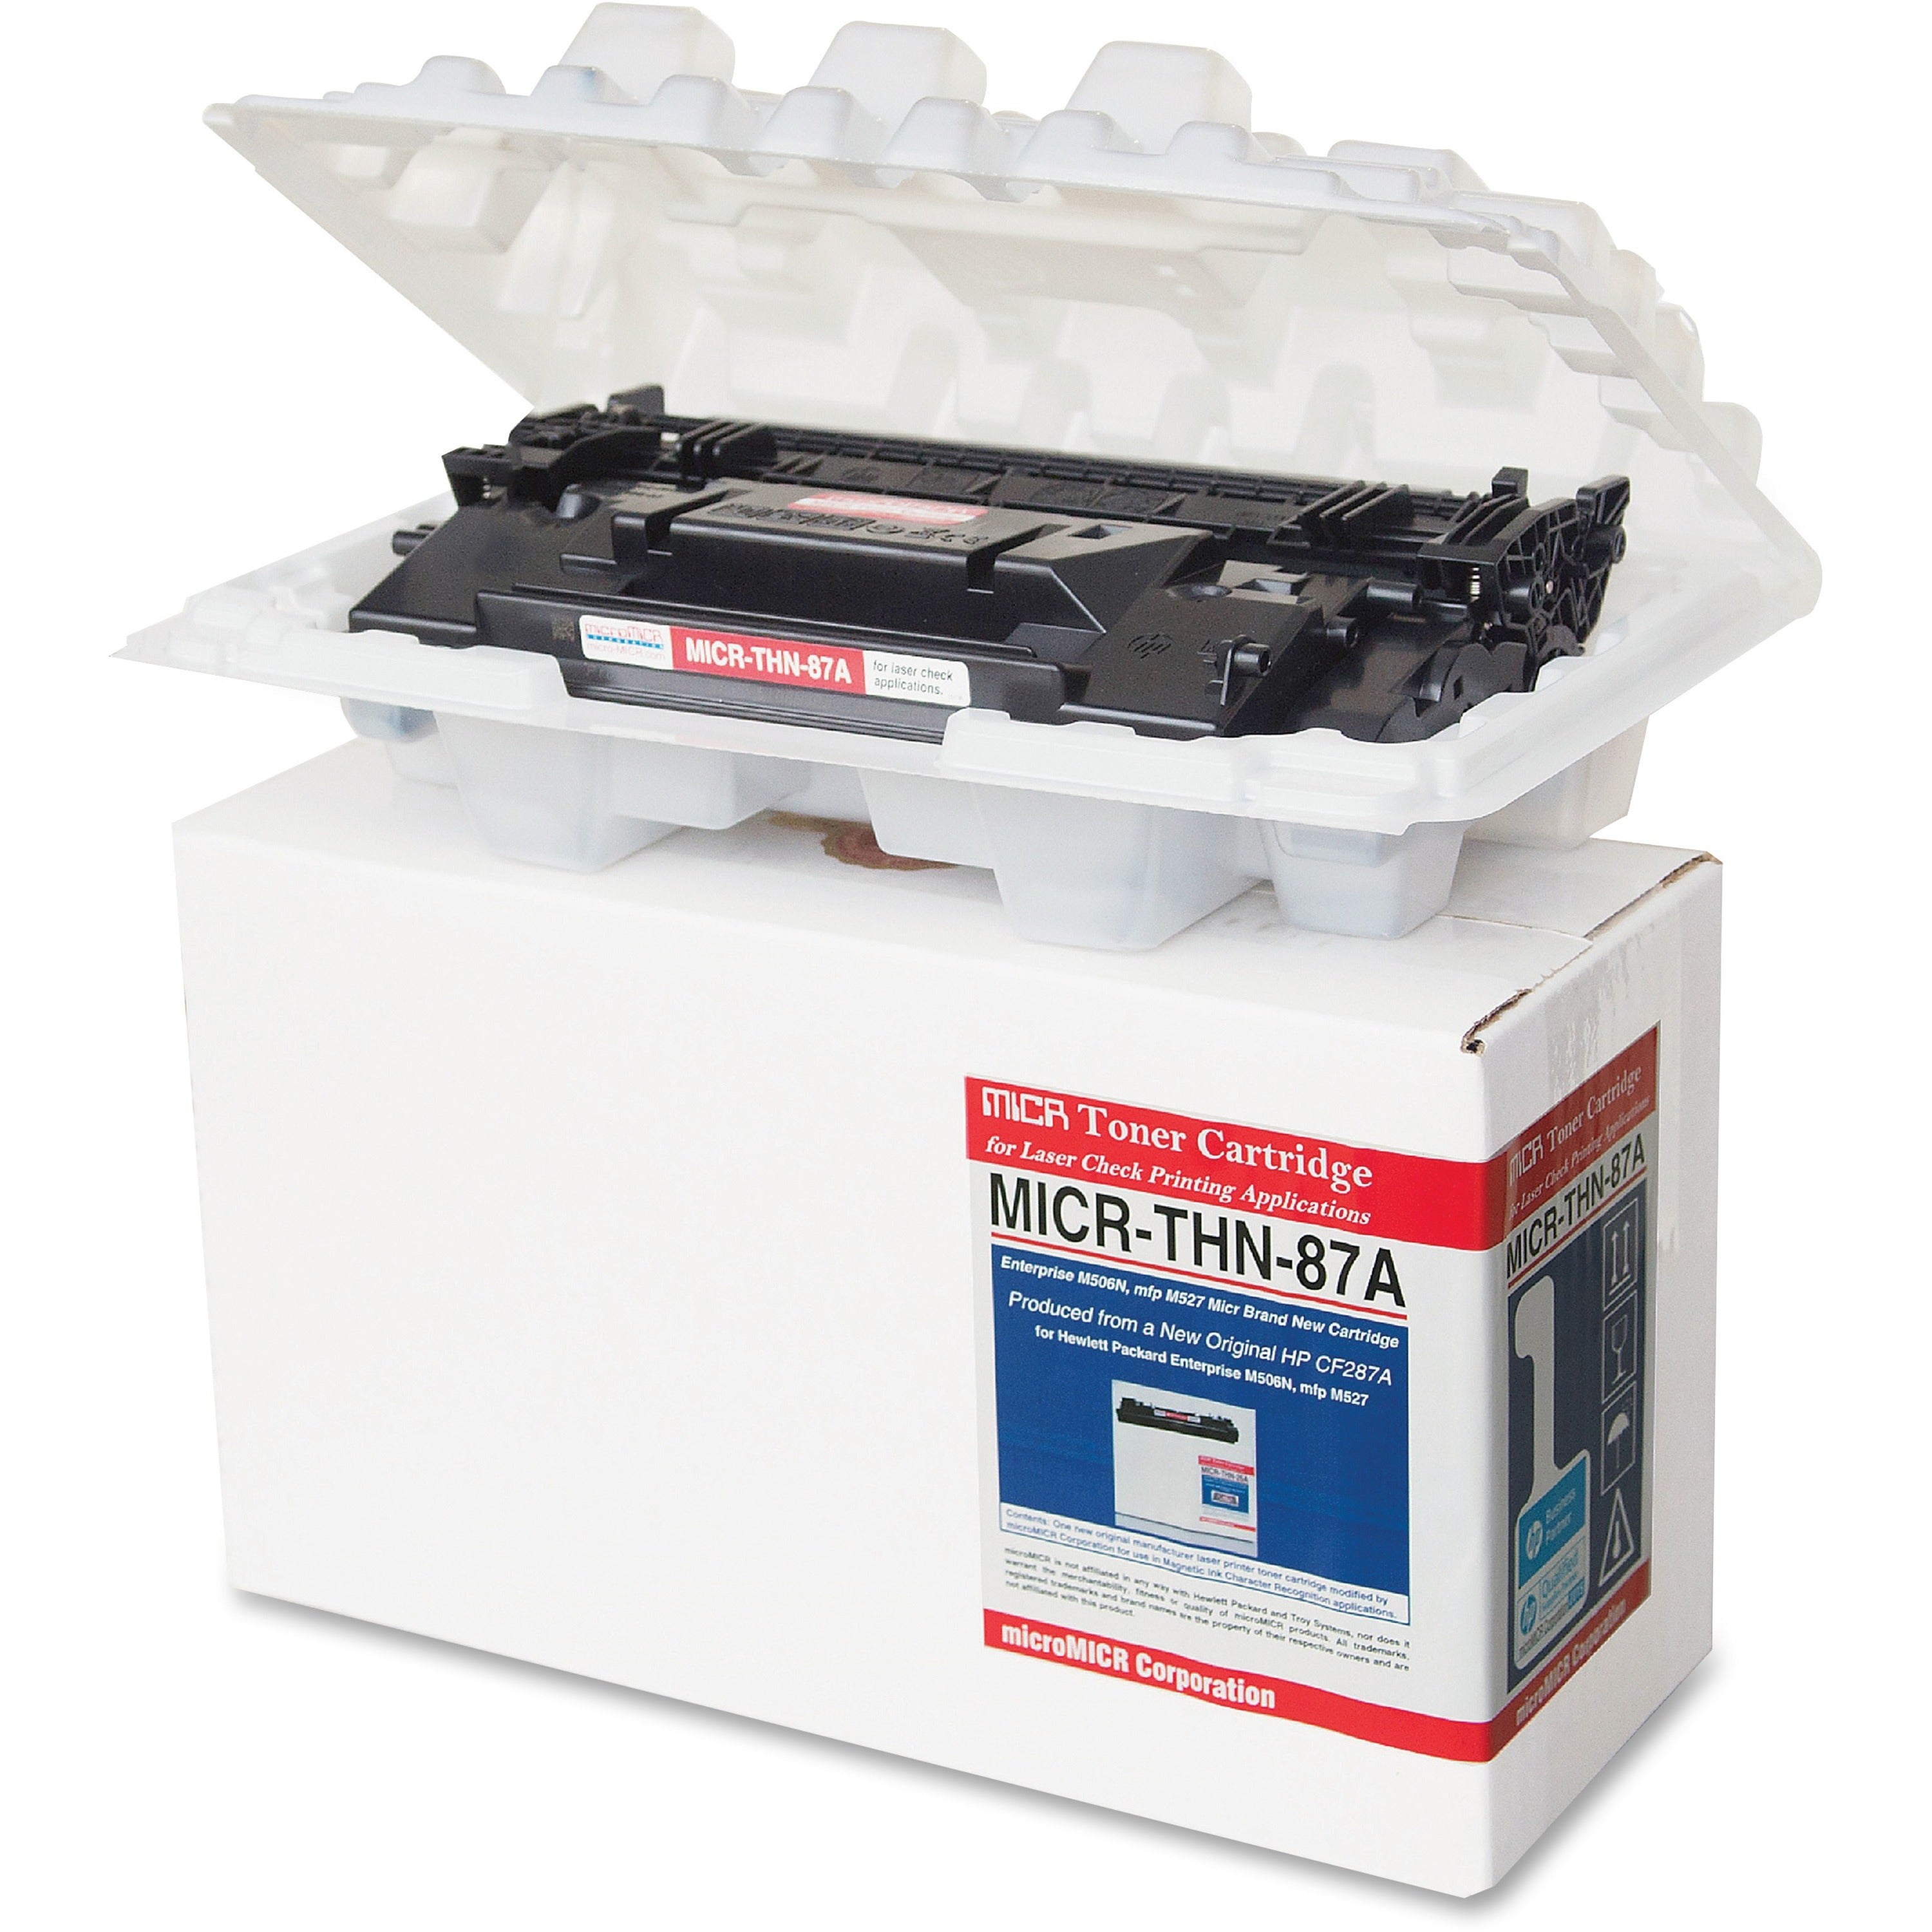 micromicr-micr-toner-cartridge-alternative-for-hp-87a-laser-9000-pages-black-1-each_mcmmicrthn87a - 1